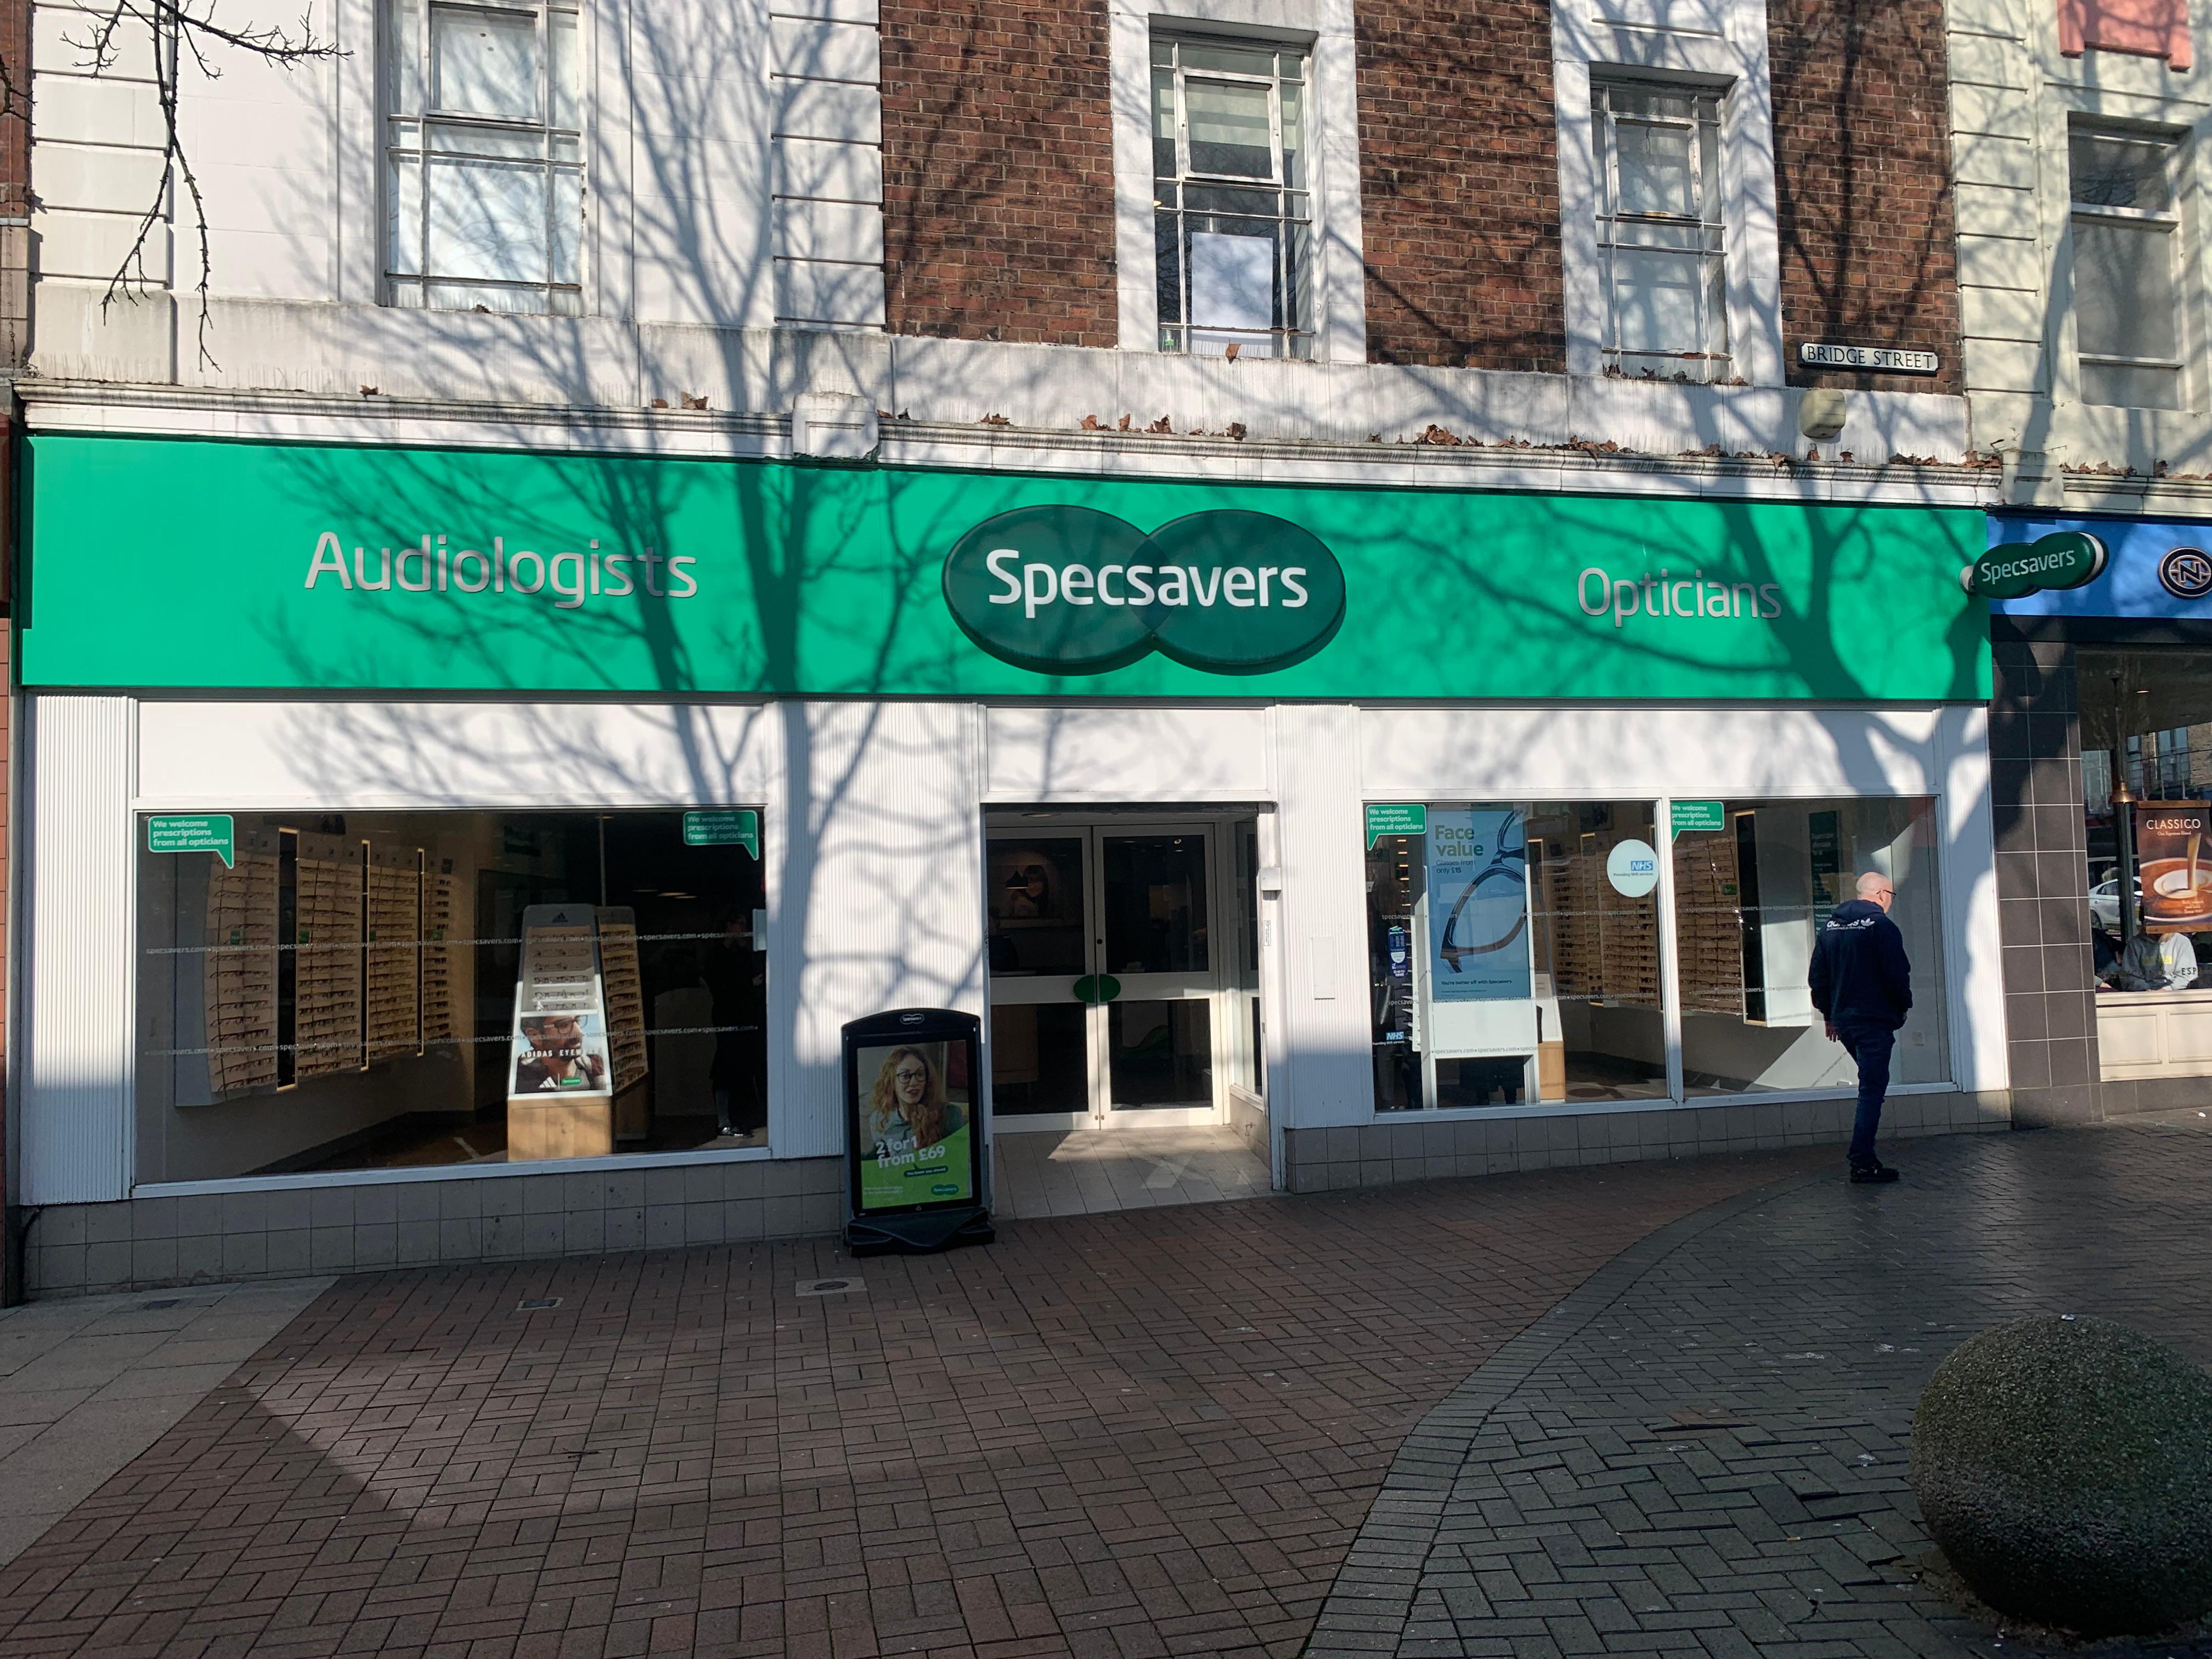 Images Specsavers Opticians and Audiologists - St Helens